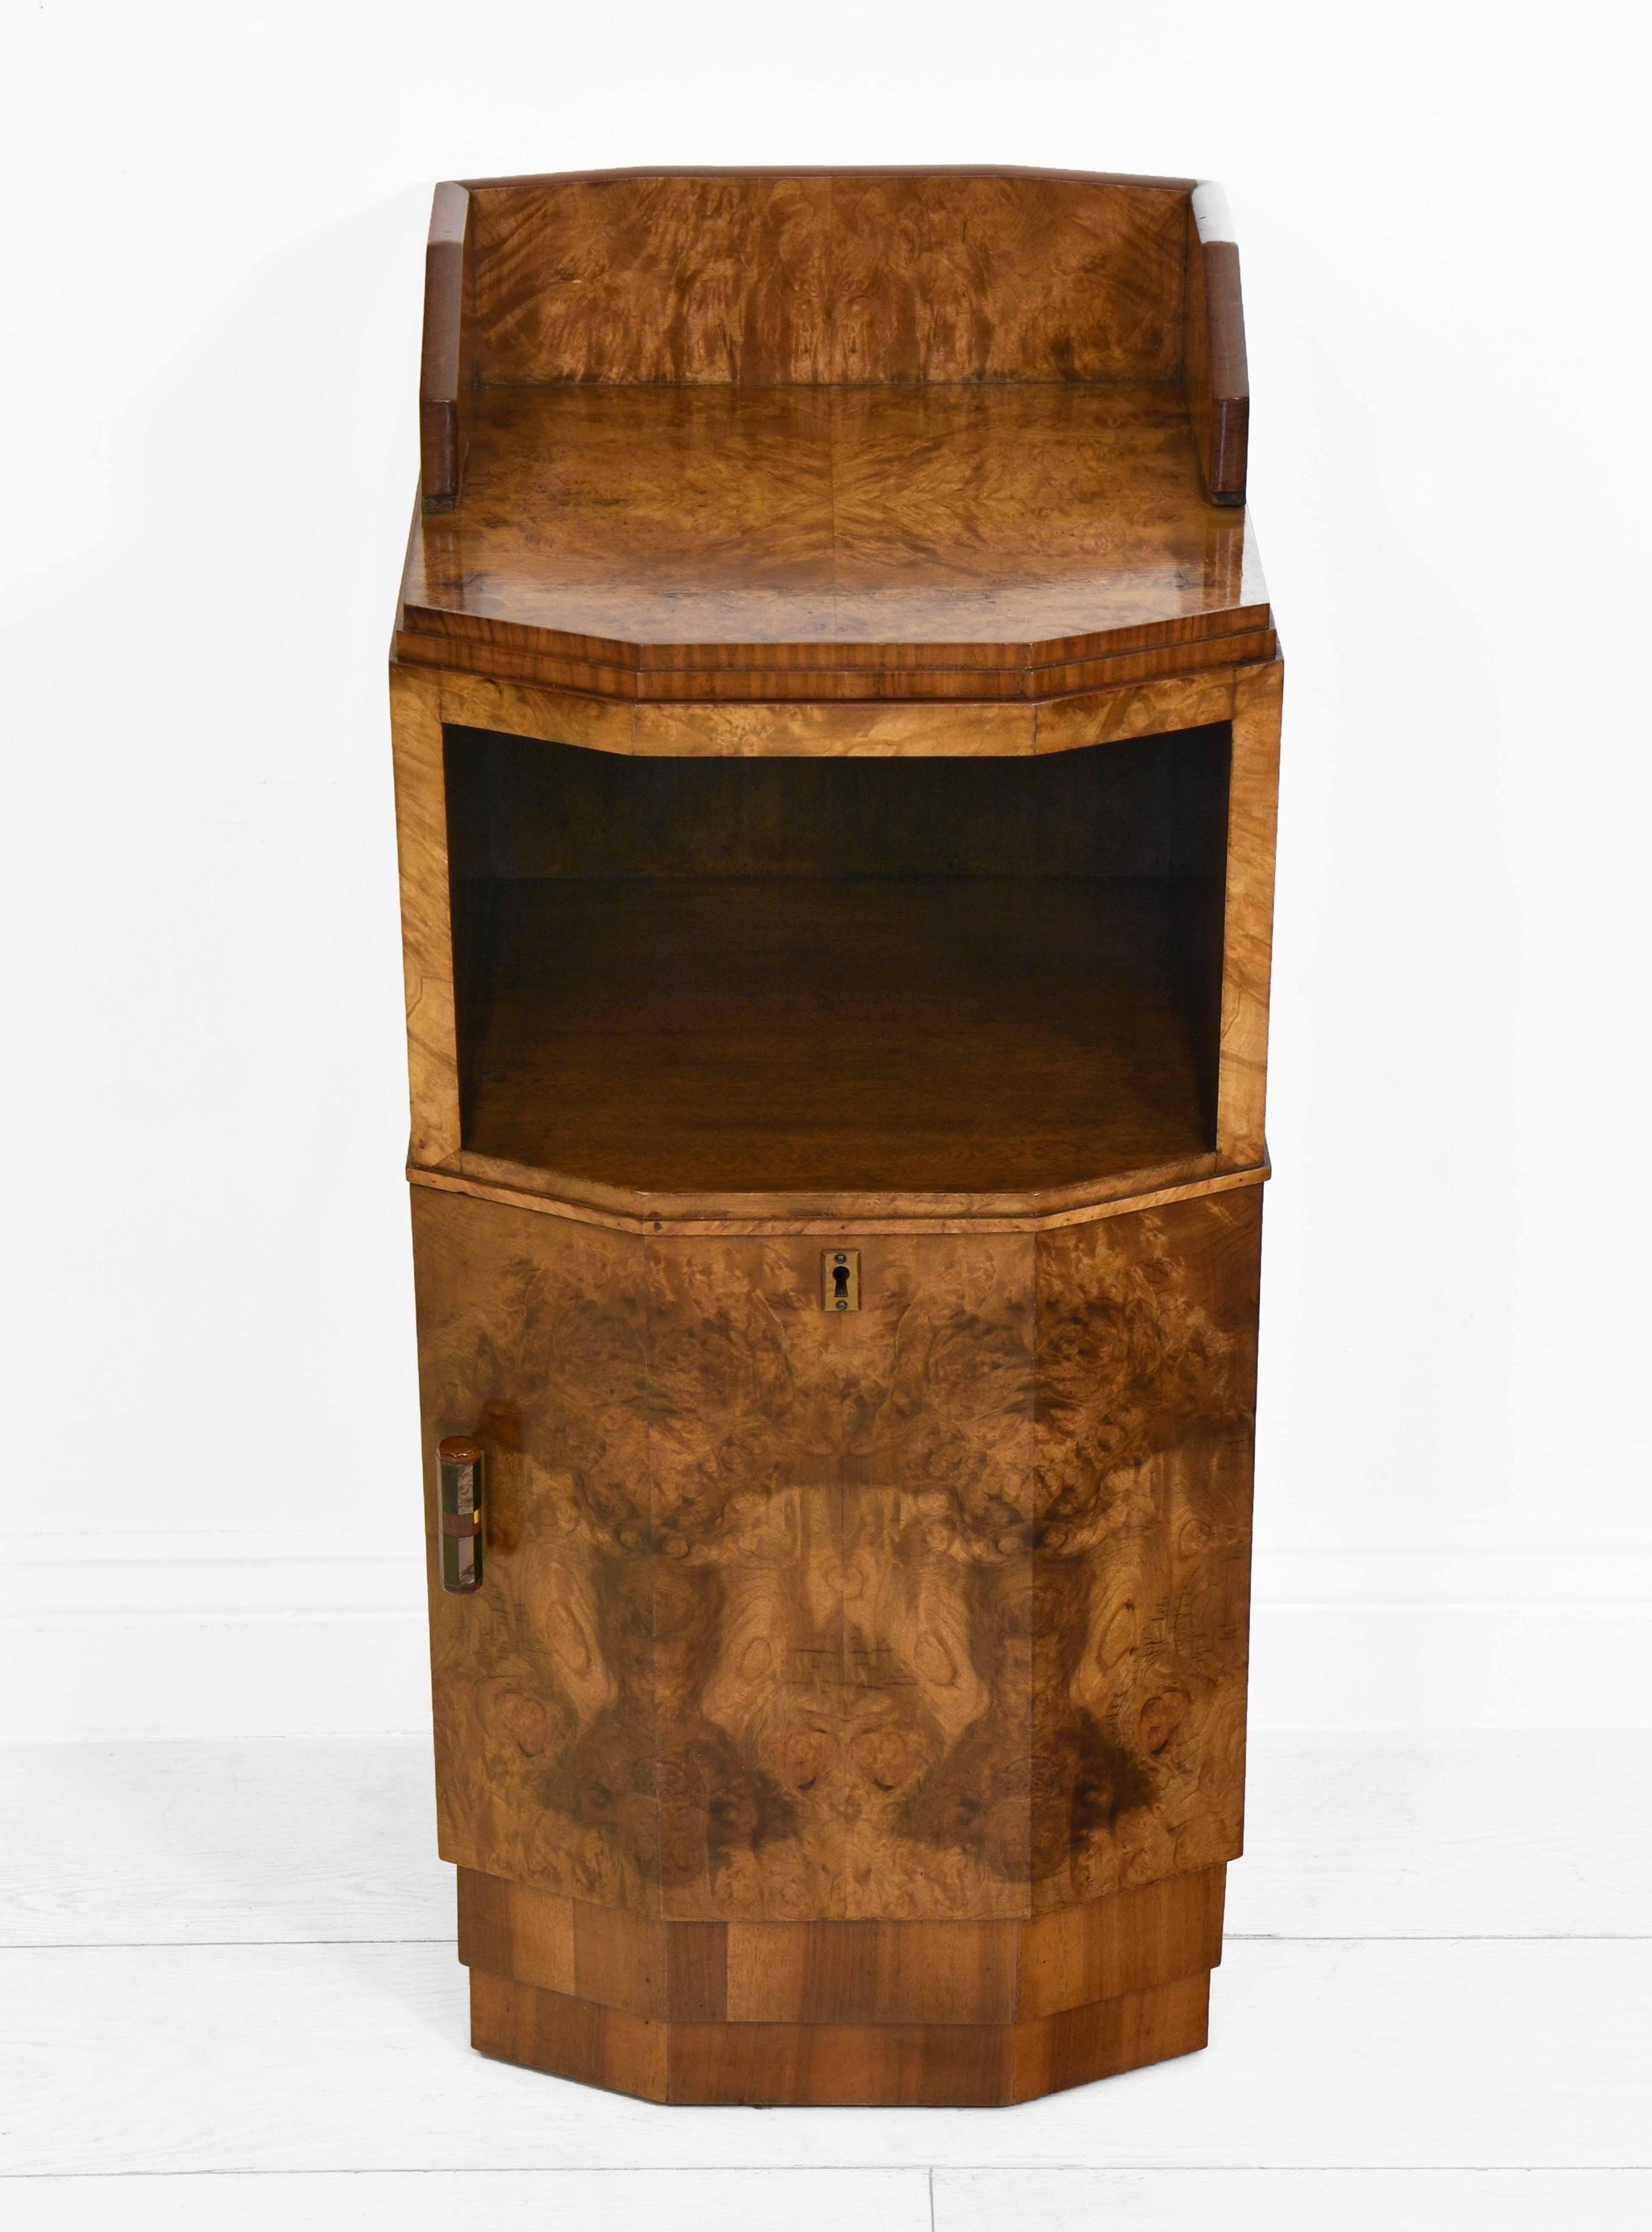 A stylish Art Deco burr and figured walnut canted bedside cabinet on stepped plinth. Circa 1930.

*Free delivery for all areas in mainland England & Wales only. Delivery to room of choice by a two person team. Items are left packed.

The cabinet is